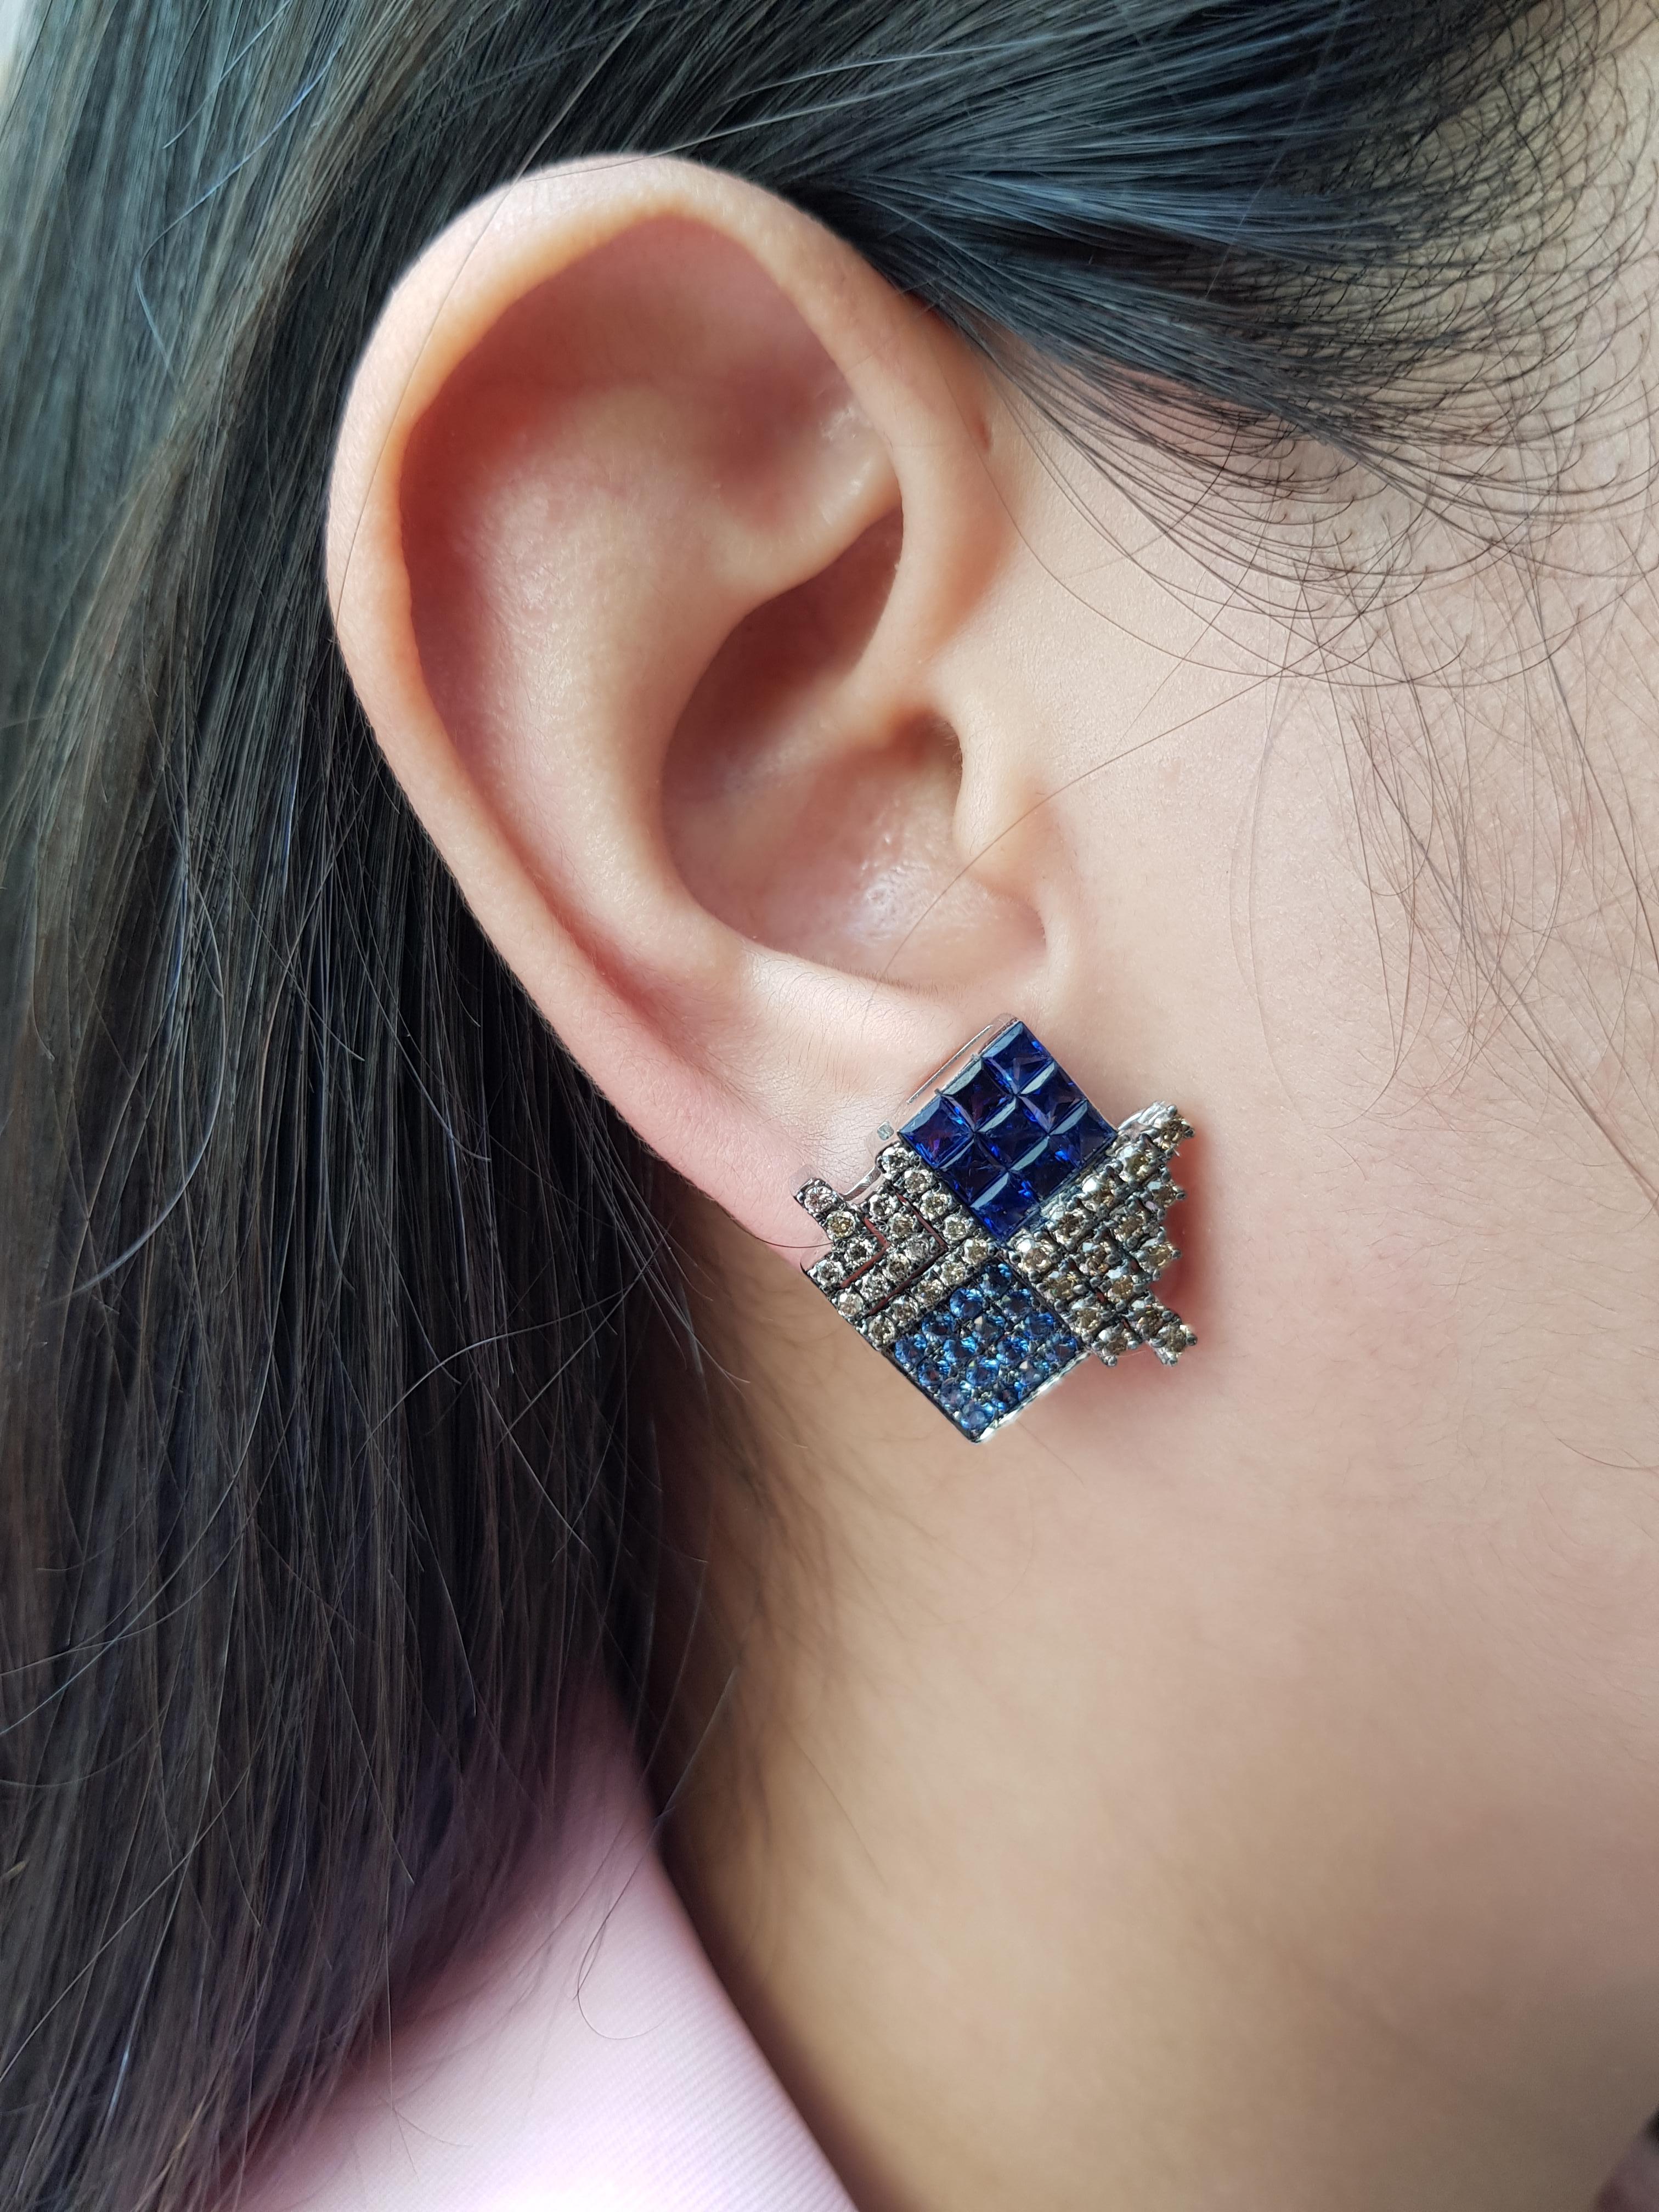 Blue Sapphire 3.88 carats with Brown Diamond 1.50 carats Earrings set in 18 Karat White Gold Settings

Width: 2.0 cm
Length: 2.4 cm 


